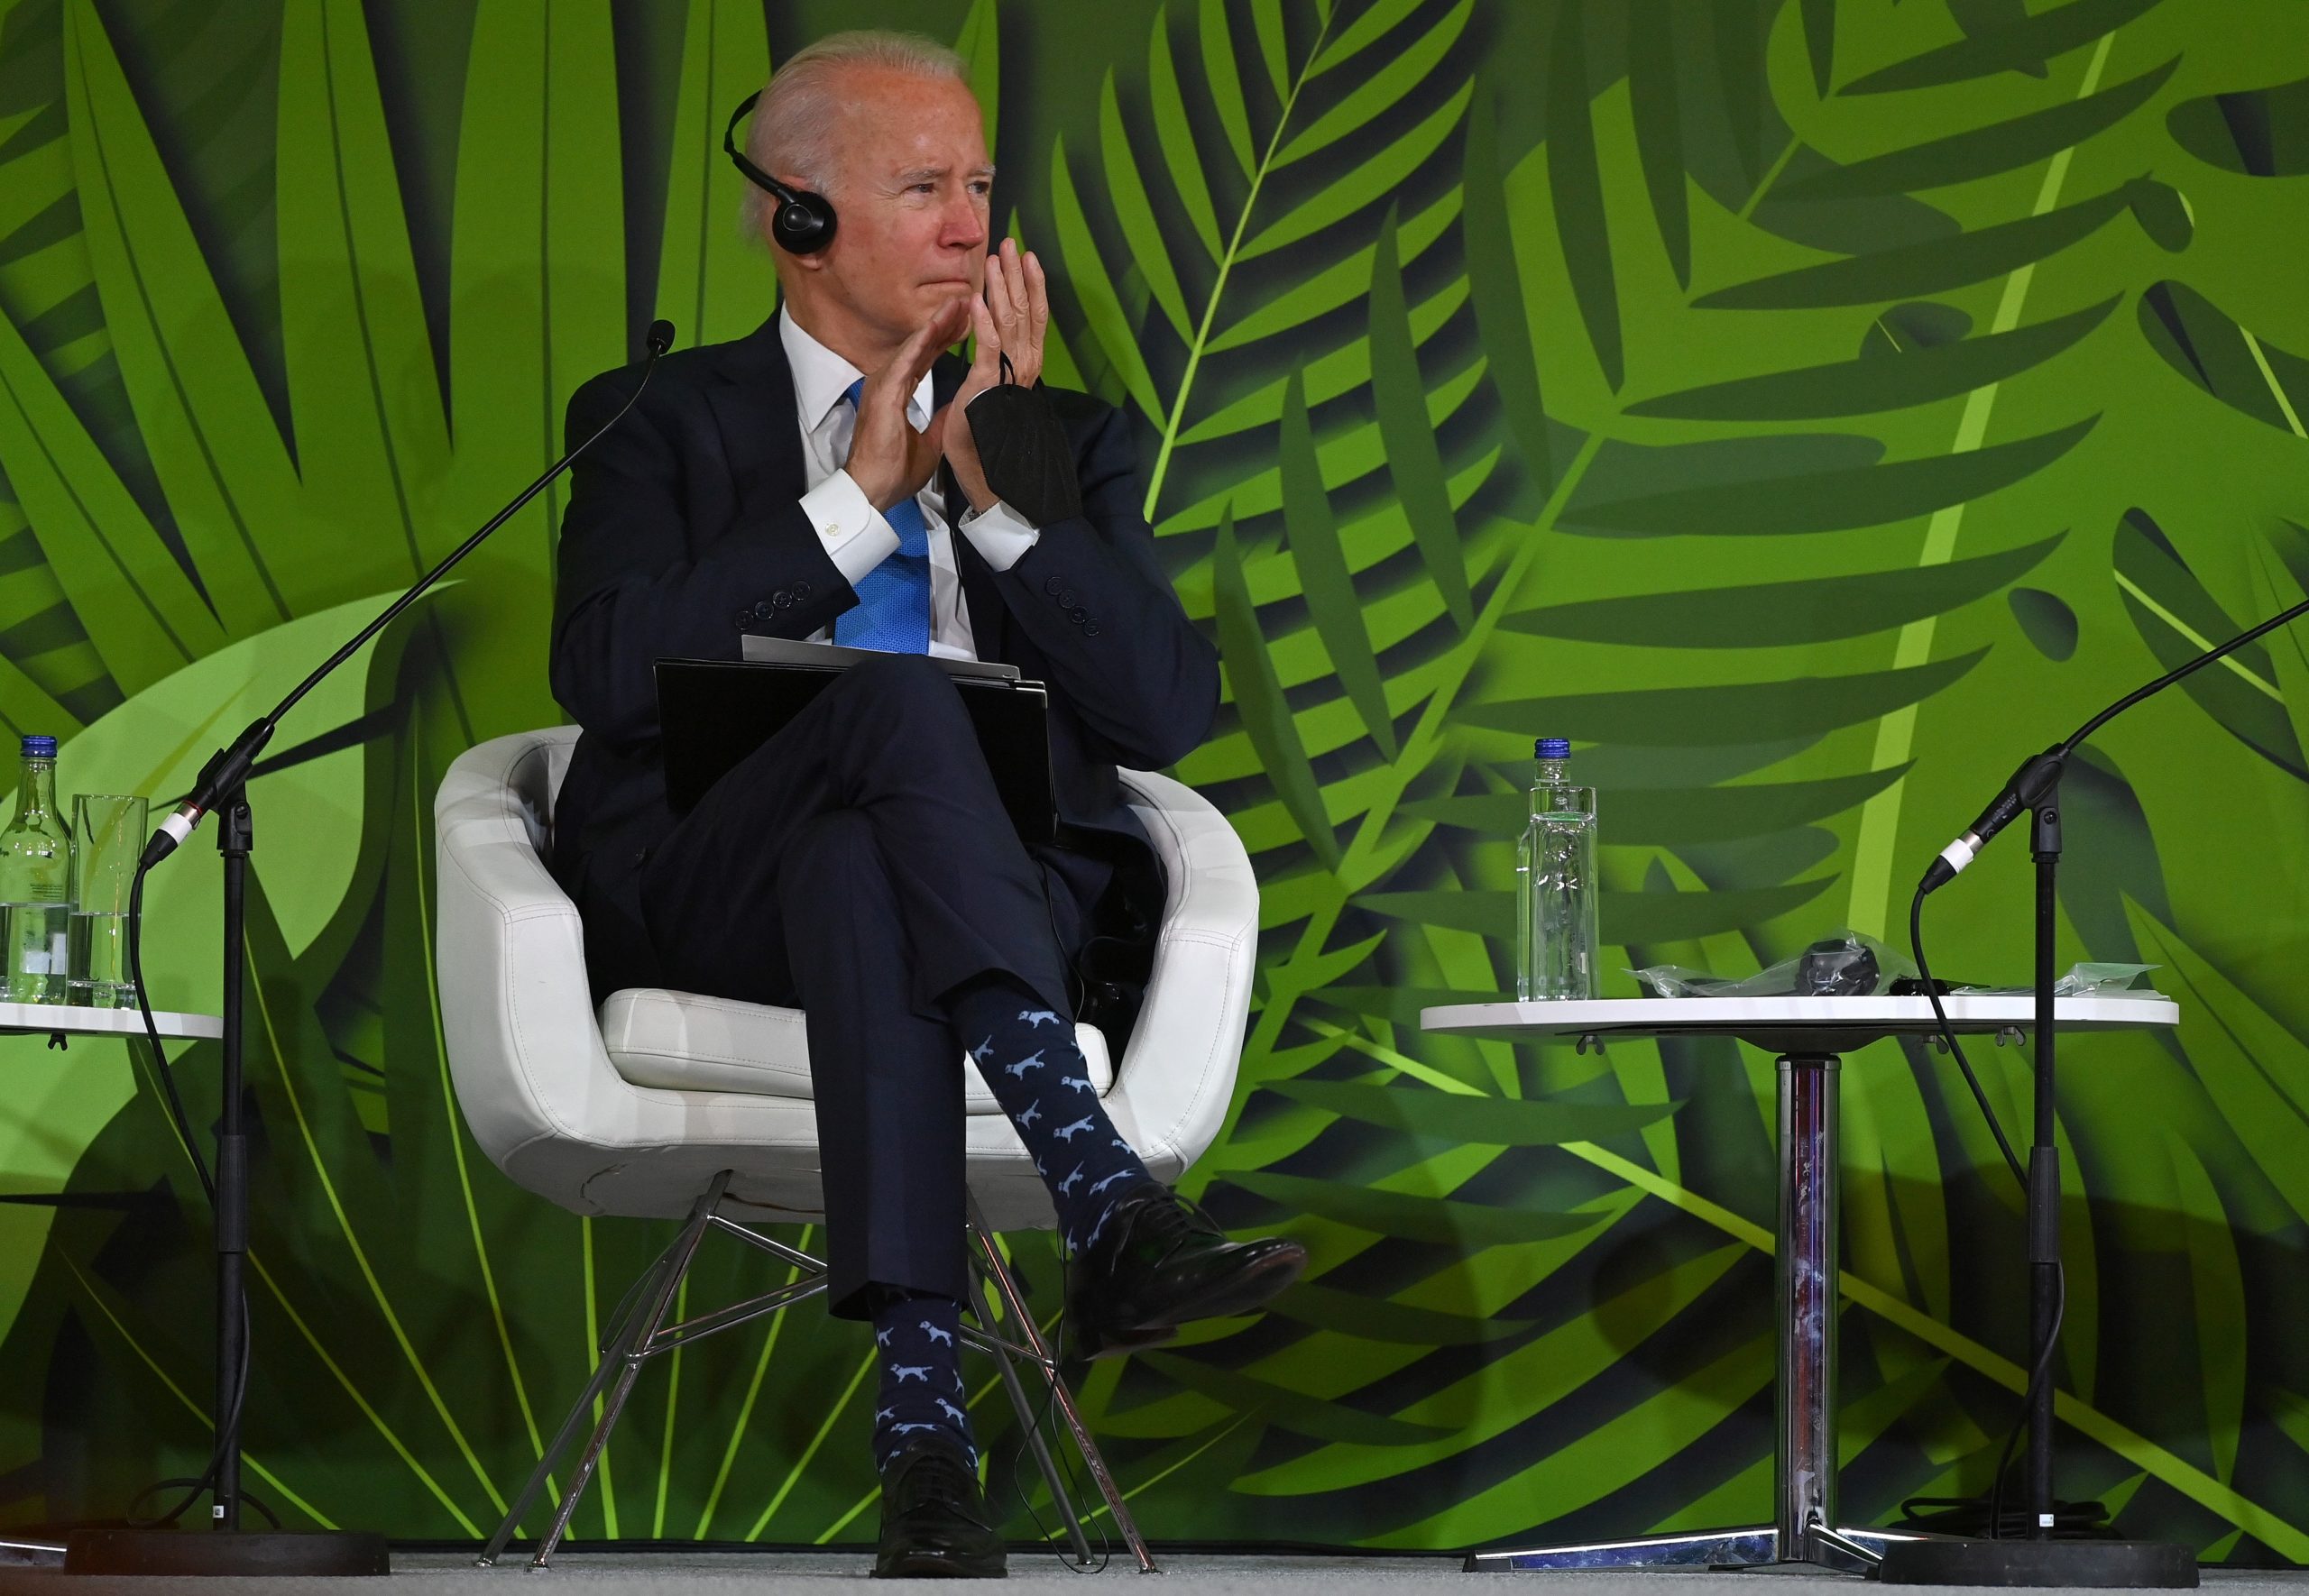 President Joe Biden attends an event at COP26 on Tuesday. (Paul Ellis/Pool/Getty Images)